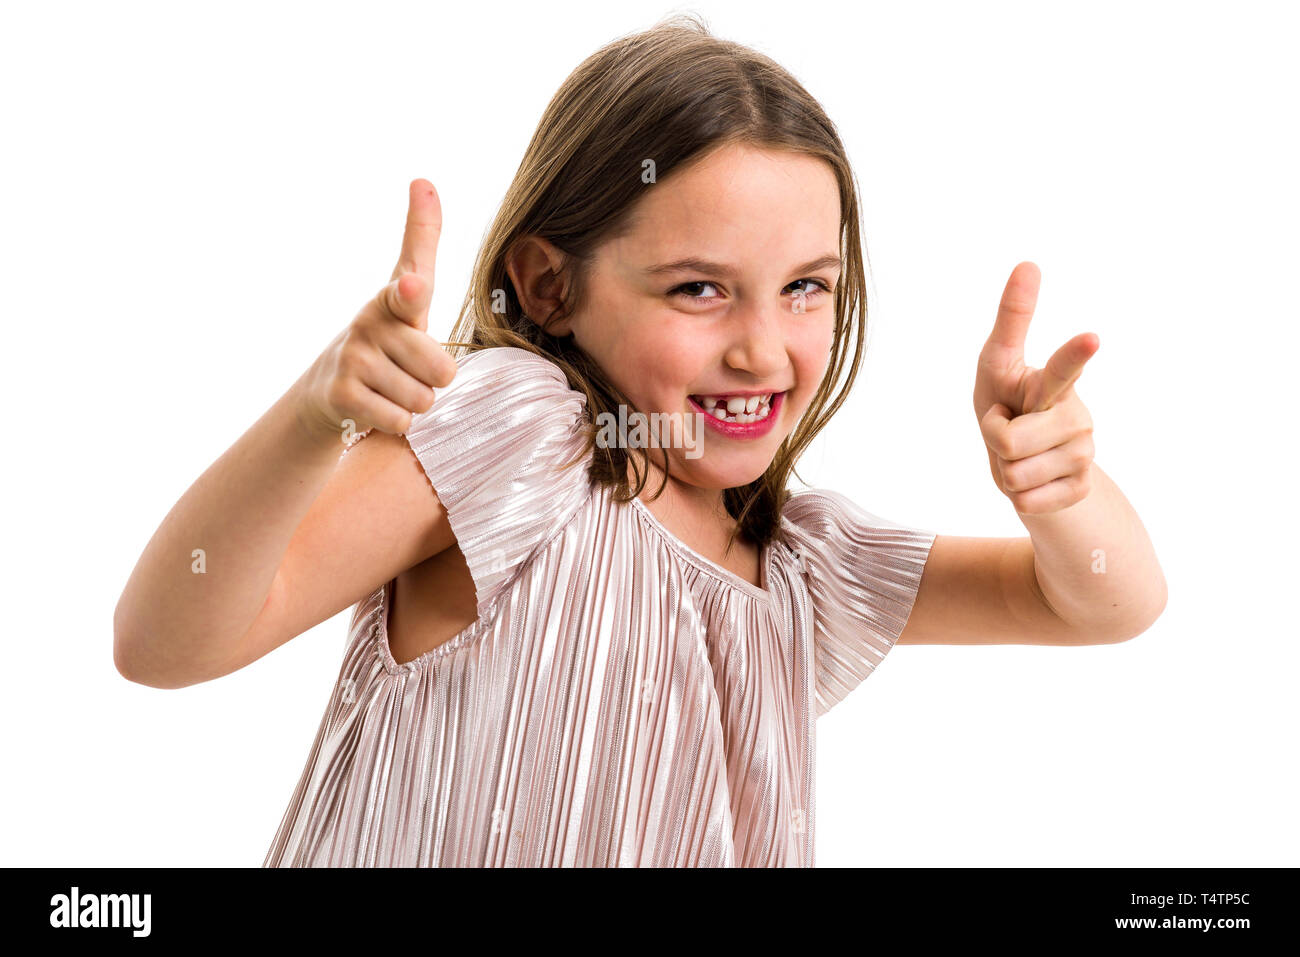 Portrait of happy girl pointing finger gun gesture at camera. Portrait of a cheerful cute little child girl looking at the camera, smiling and pointin Stock Photo